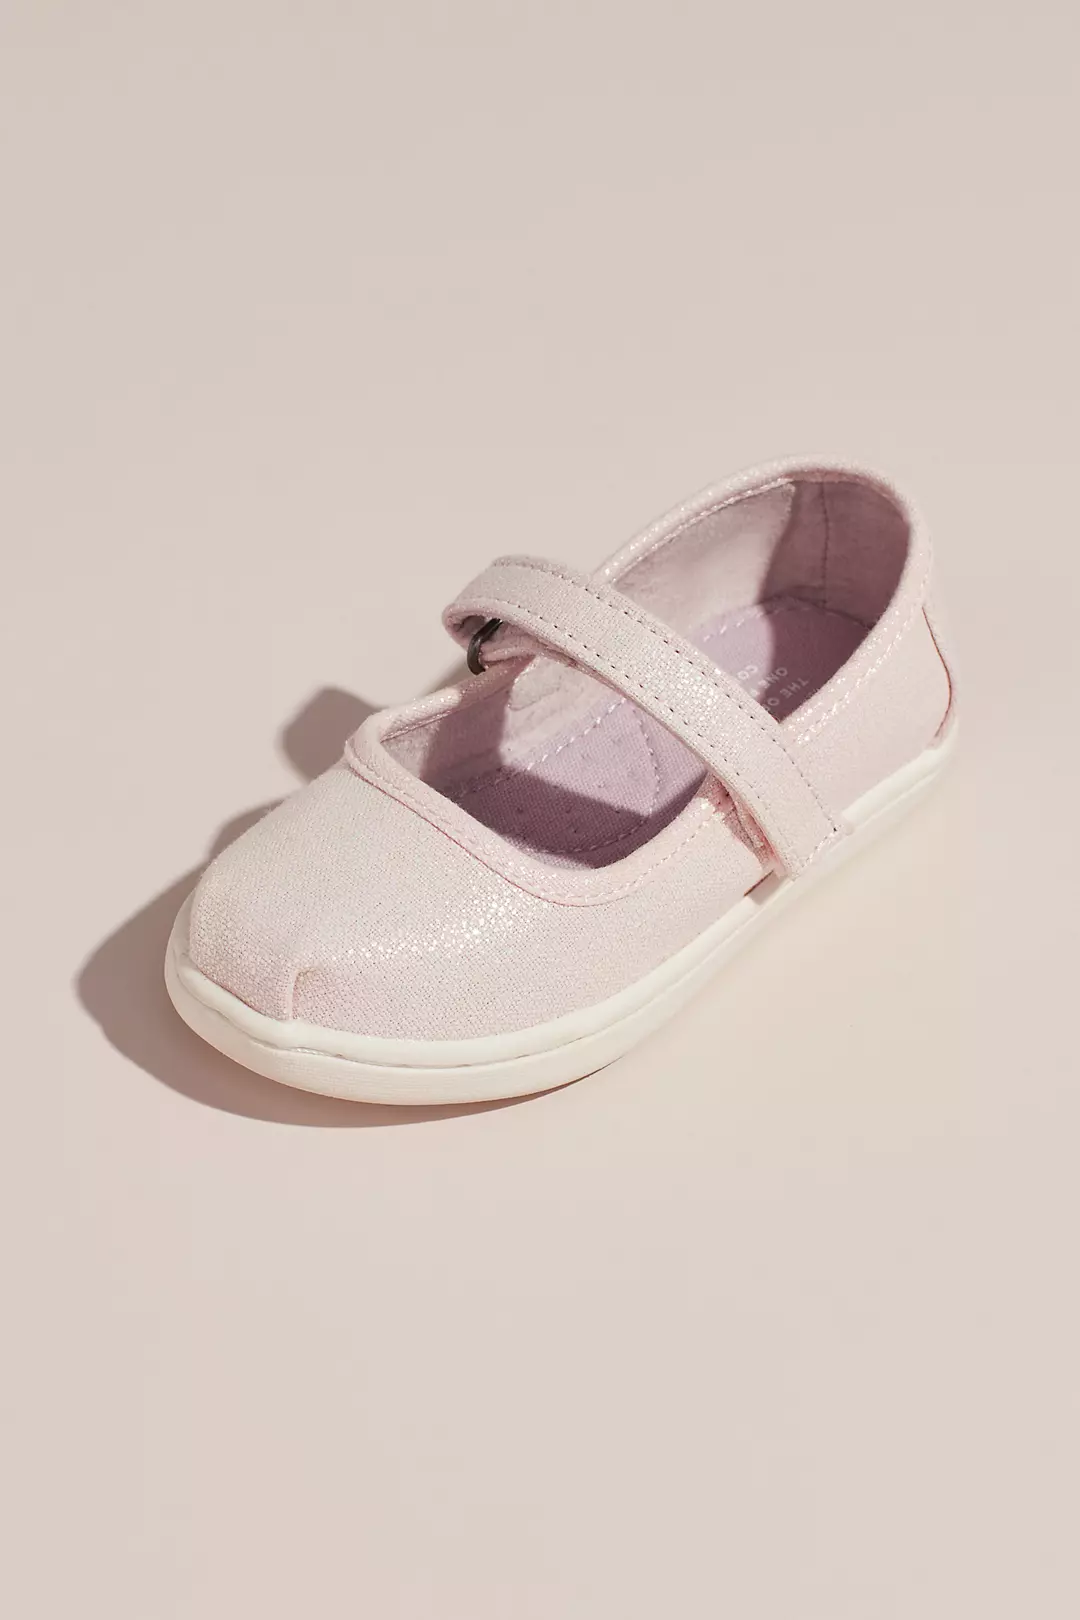 TOMS Girls Pearlized Mary Janes Image